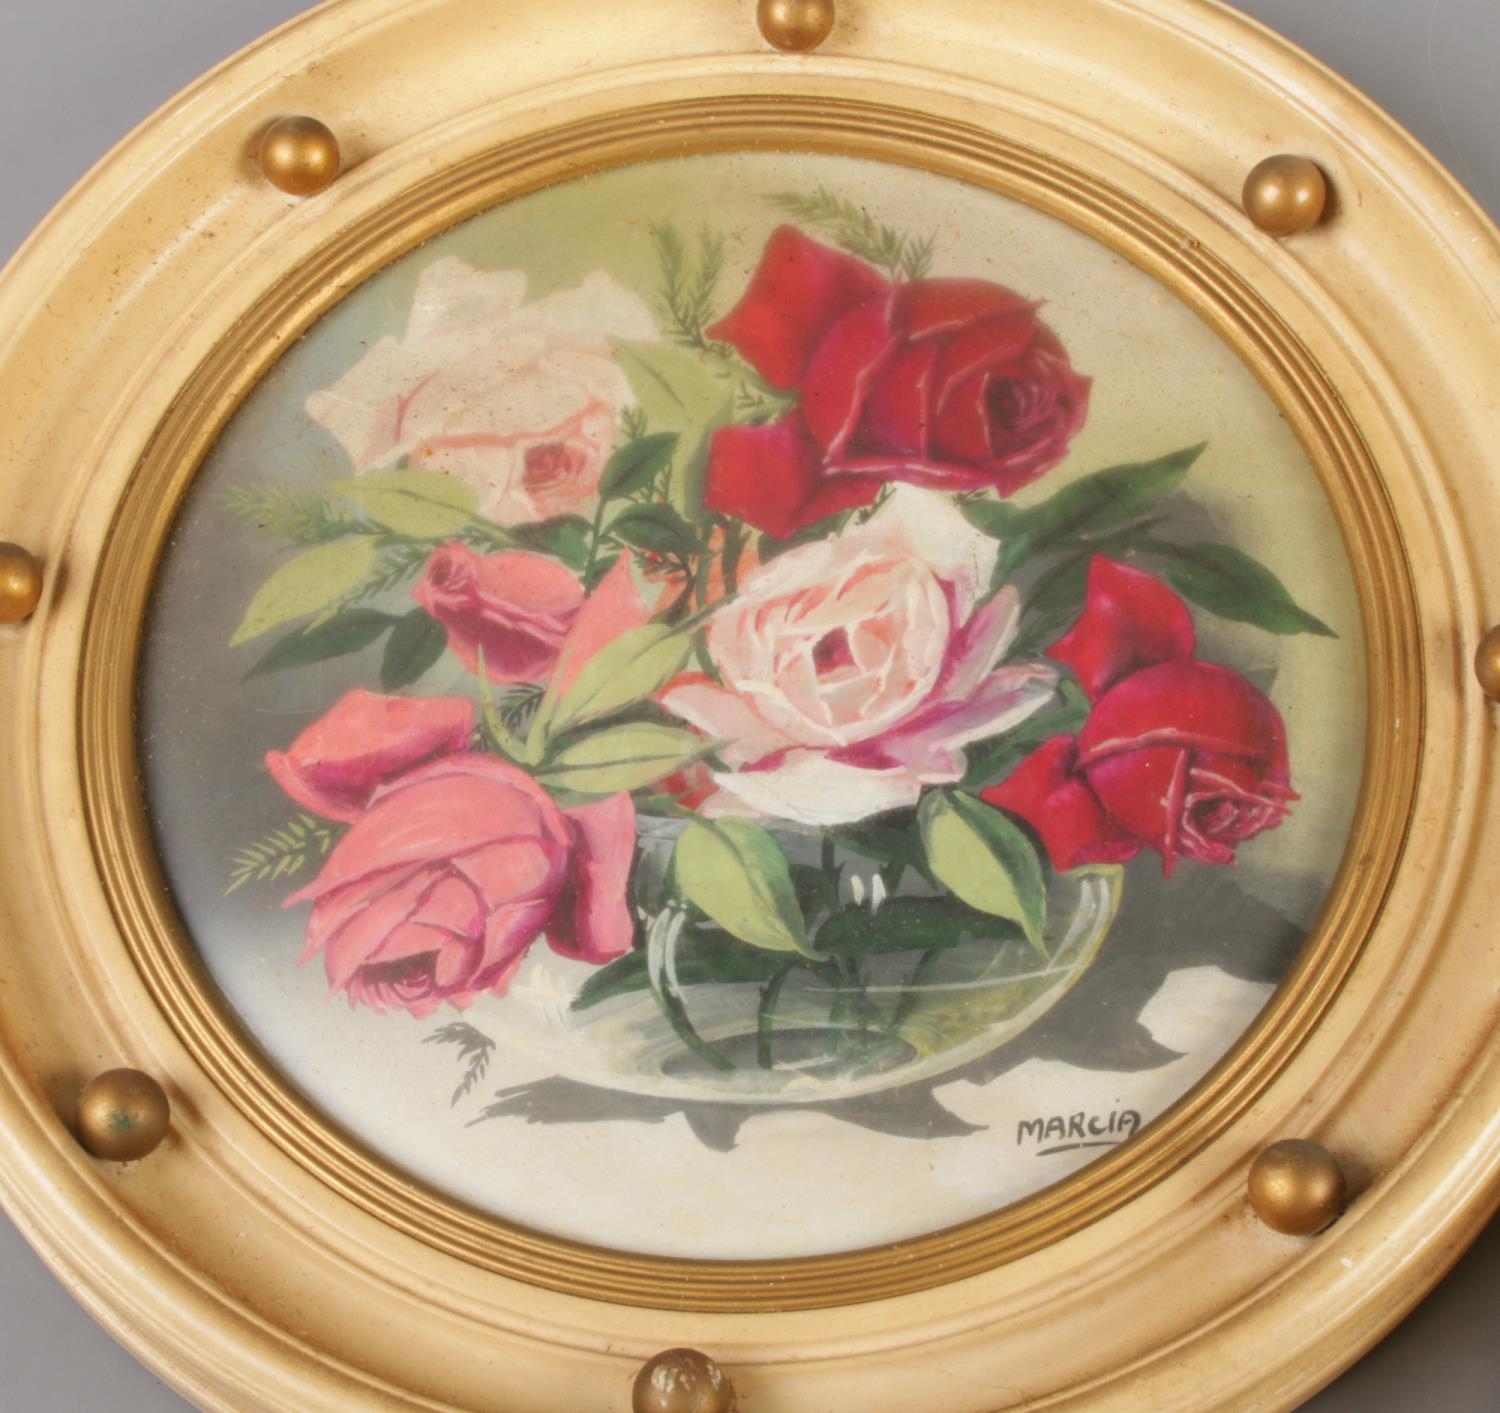 Two floral still life oil on boards, signed Rosina and Marcia, mounted in circular convex frames. - Image 3 of 3